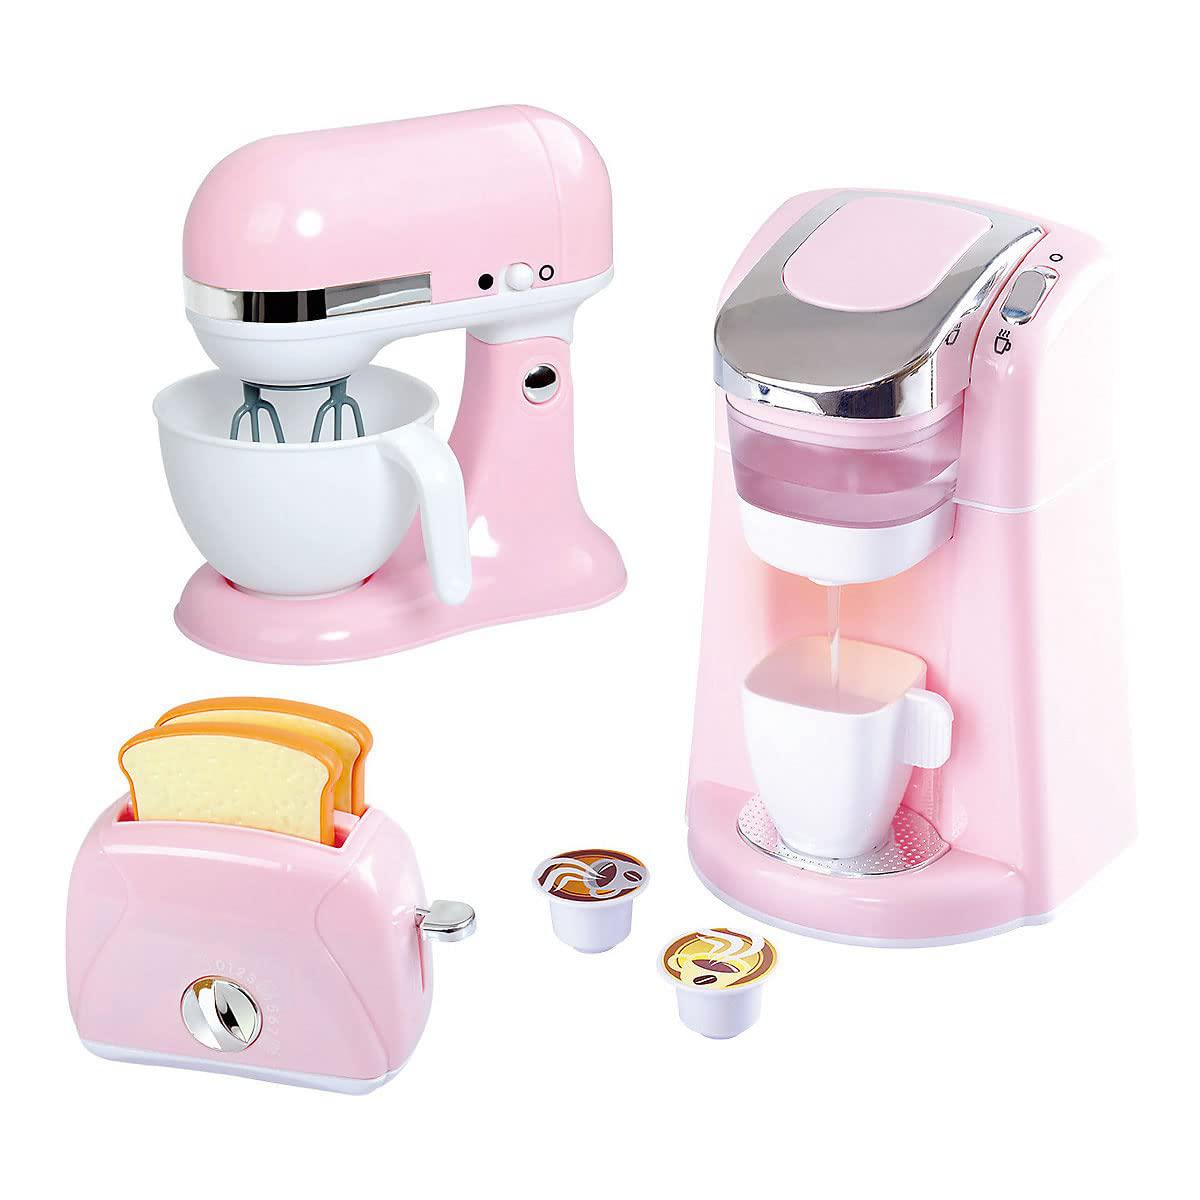 Play RNAB07L4N3Q48 battery operated gourmet kitchen appliances (child size)  has pink & white coffee maker w coffee pods, mix master and blender